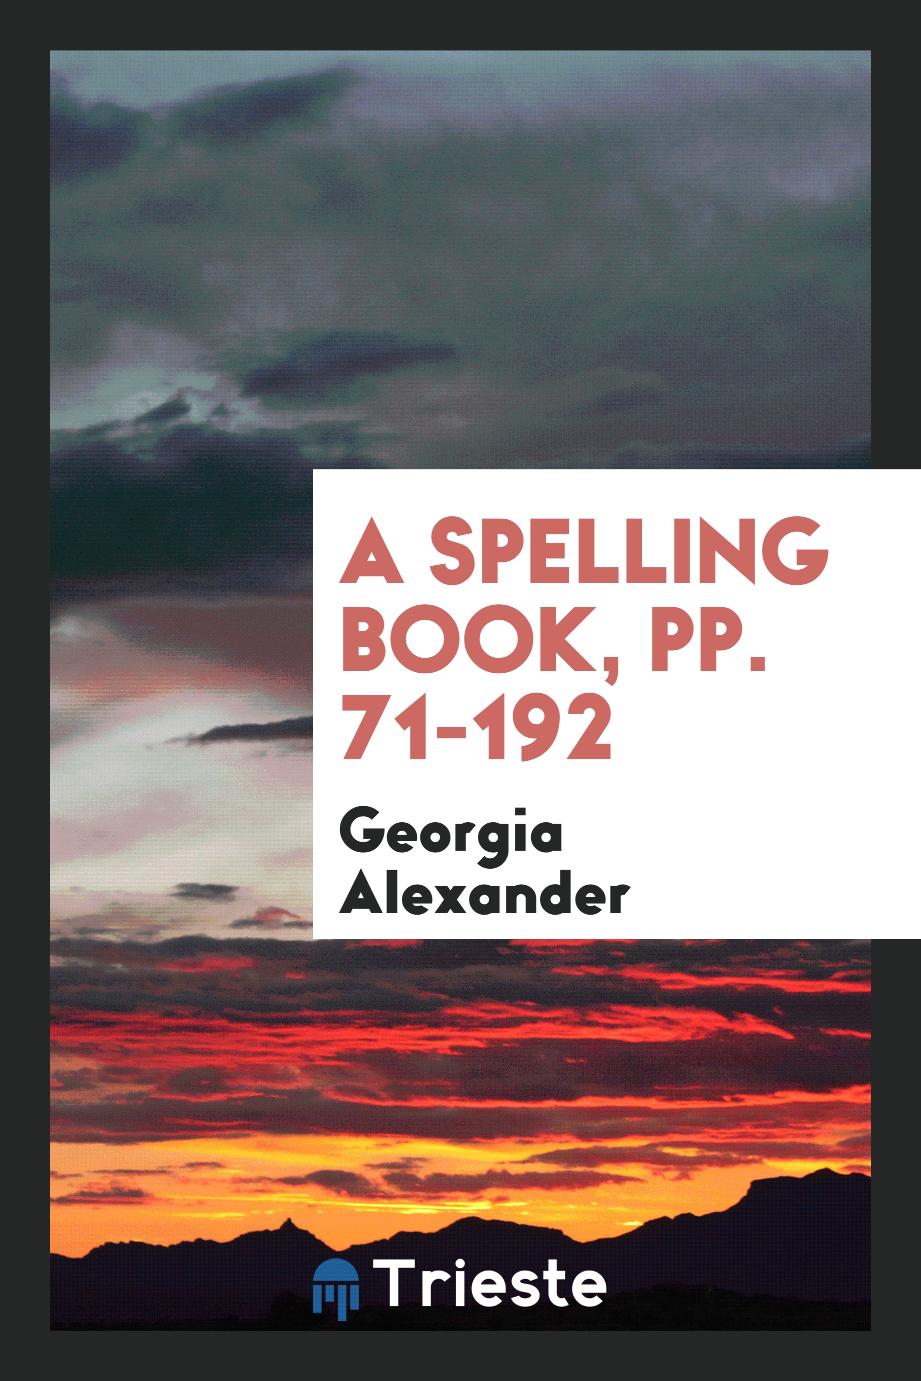 A Spelling Book, pp. 71-192